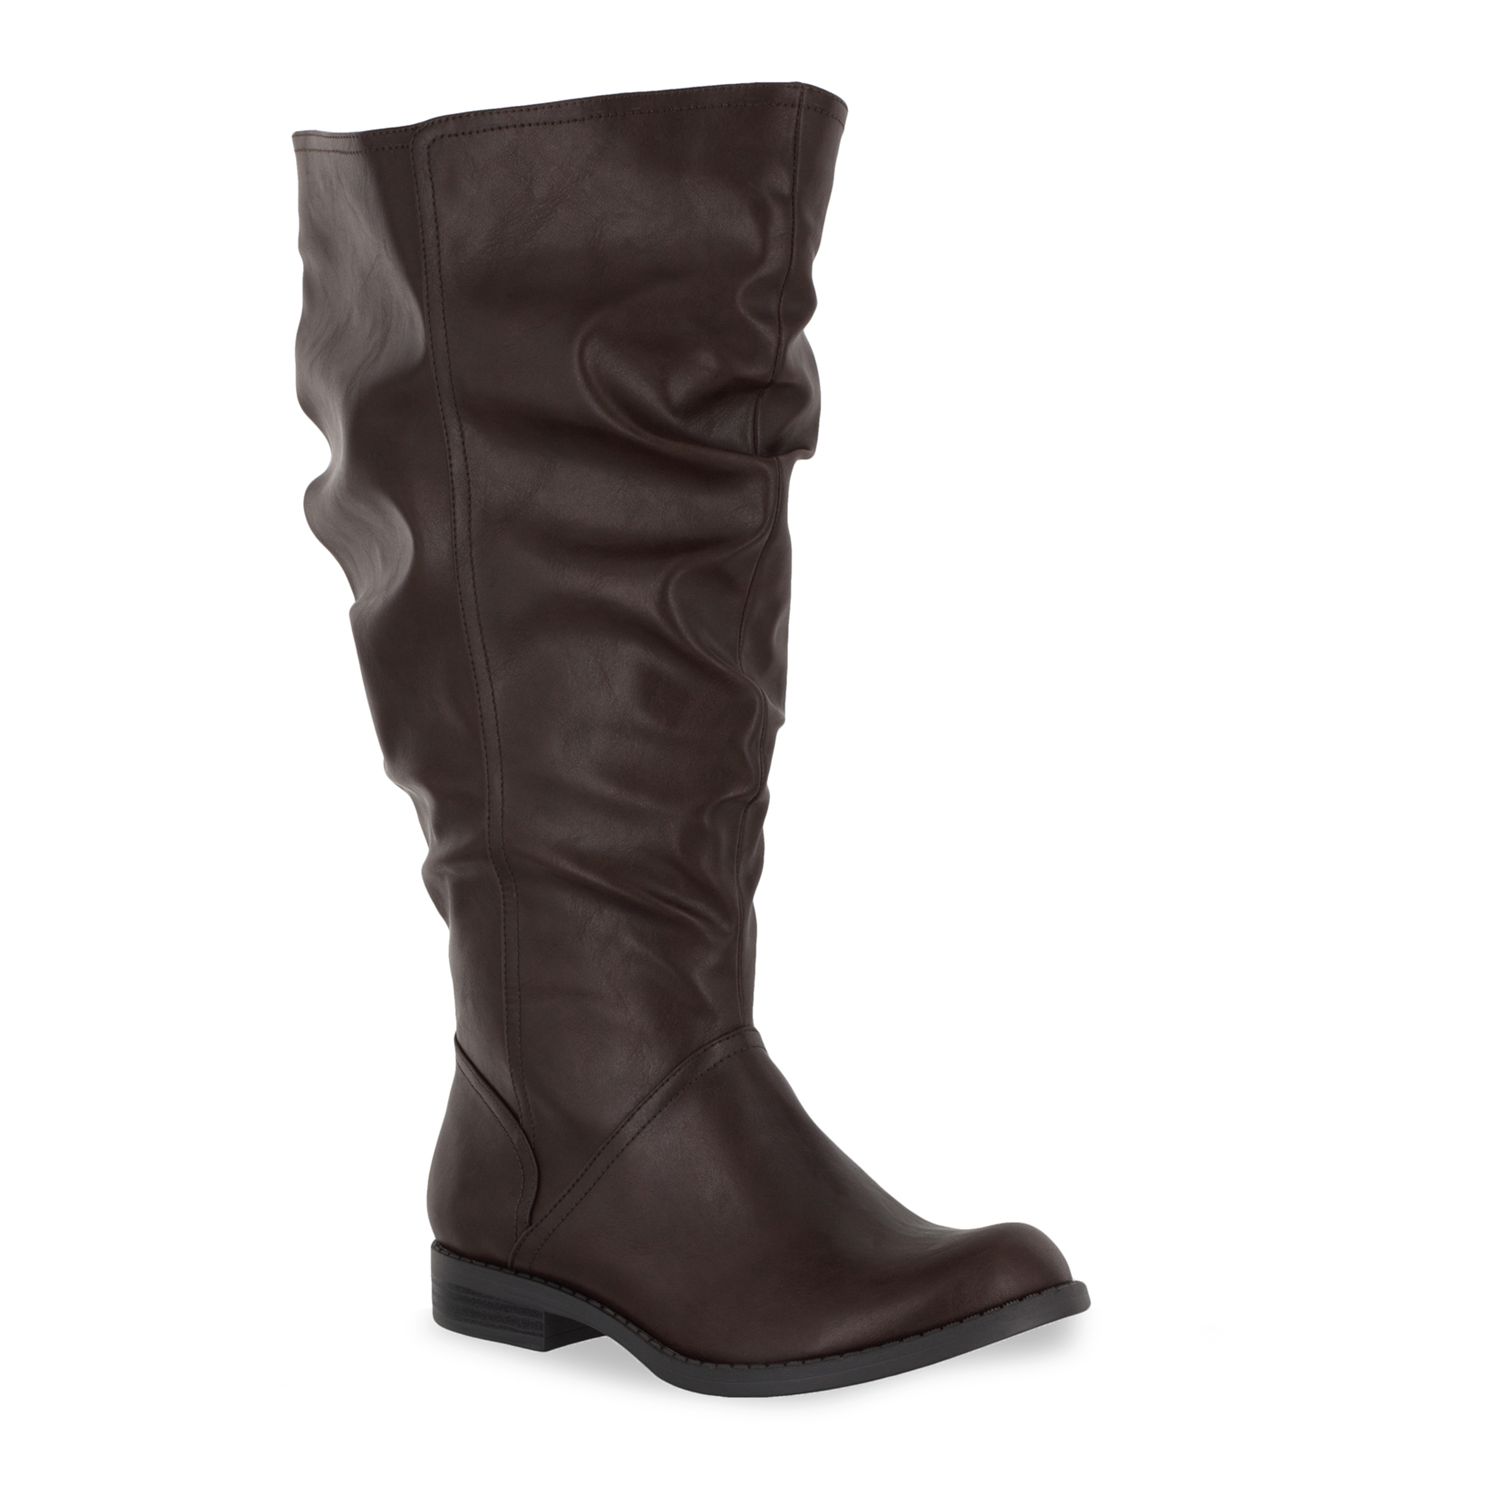 Extra-Wide-Calf Riding Boots